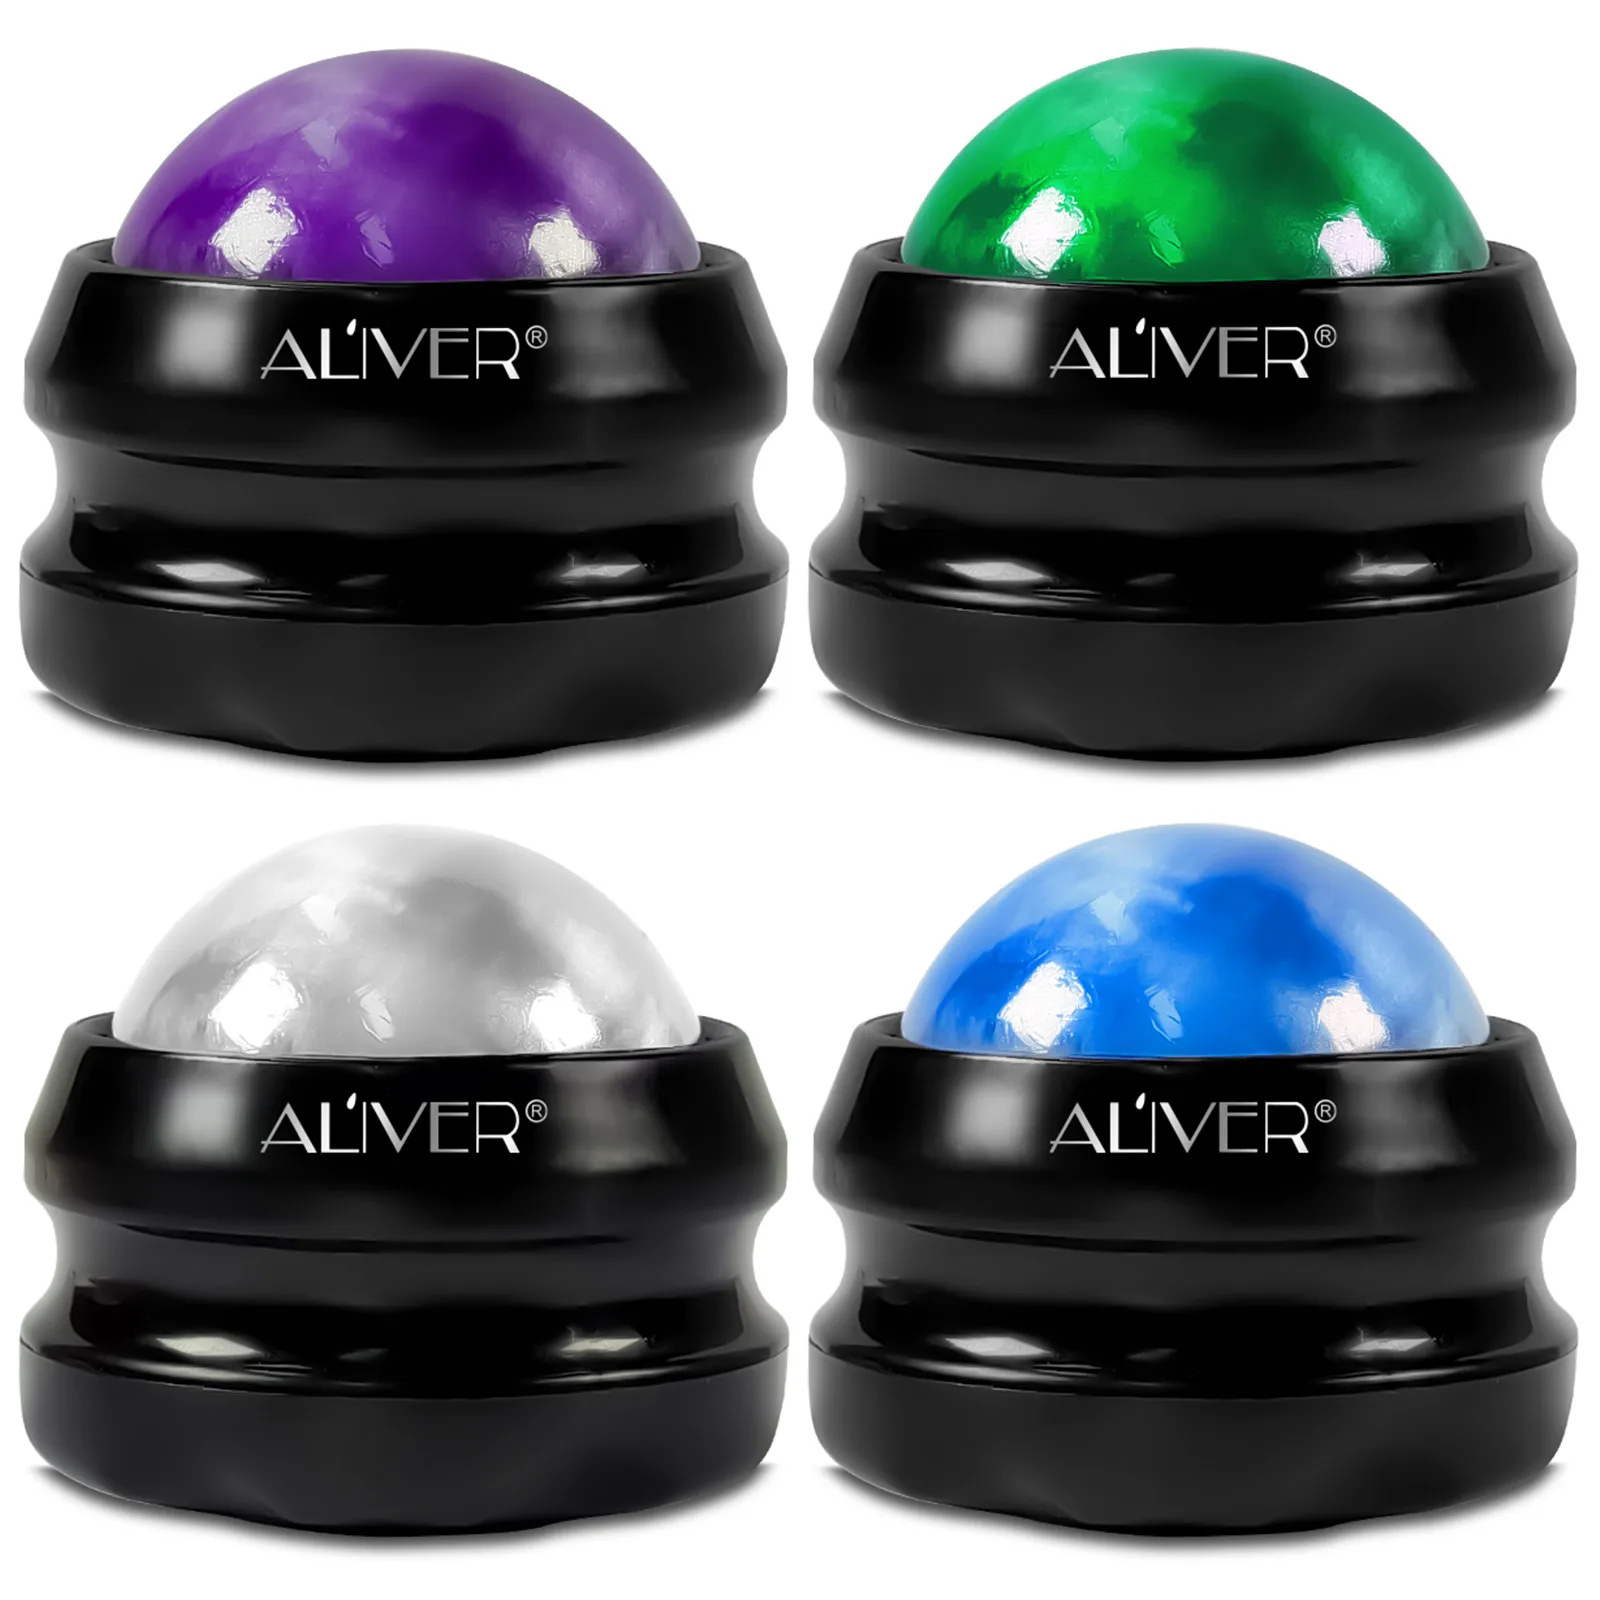 

ALIVER Massage Roller Ball for Sore Muscles Shoulders Arms Neck Back Feet Body Deep Tissue Joint Pain Stress Relief